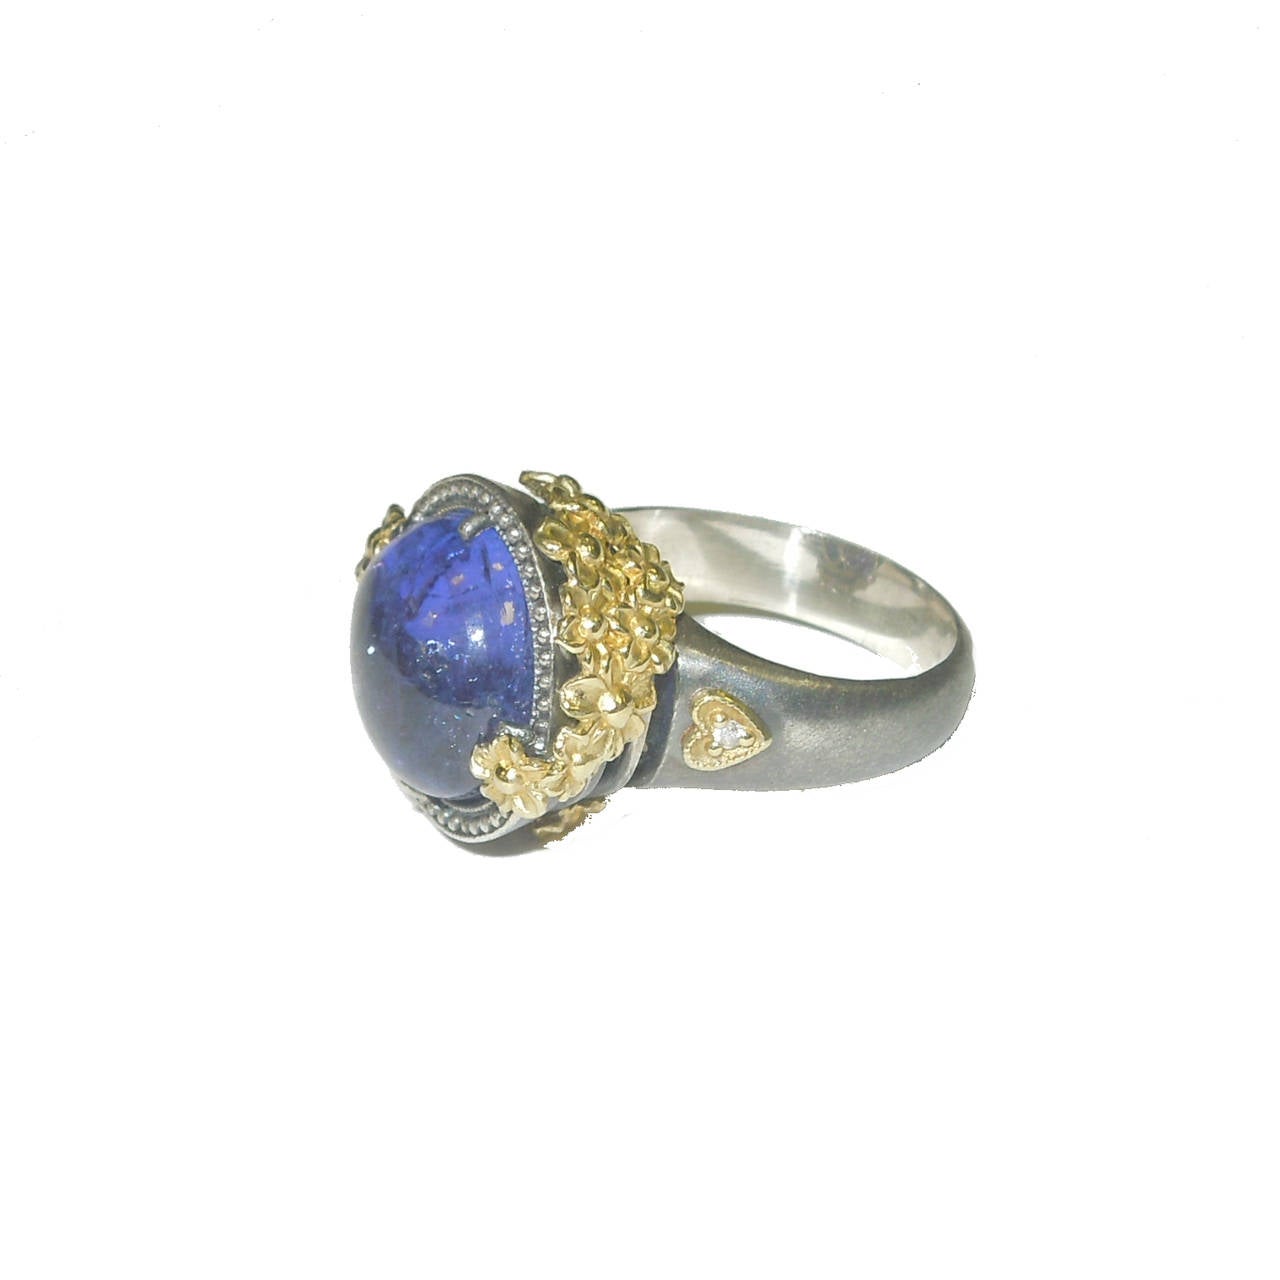 Aged Silver & 18K Gold Ring w/ Cabochon Tanzanite Center

18K Gold Flowers cover the sides of the ring with unique detail

Center Cabochon Tanzanite 8.95 ct.'s

Side of the ring has our Trademark 